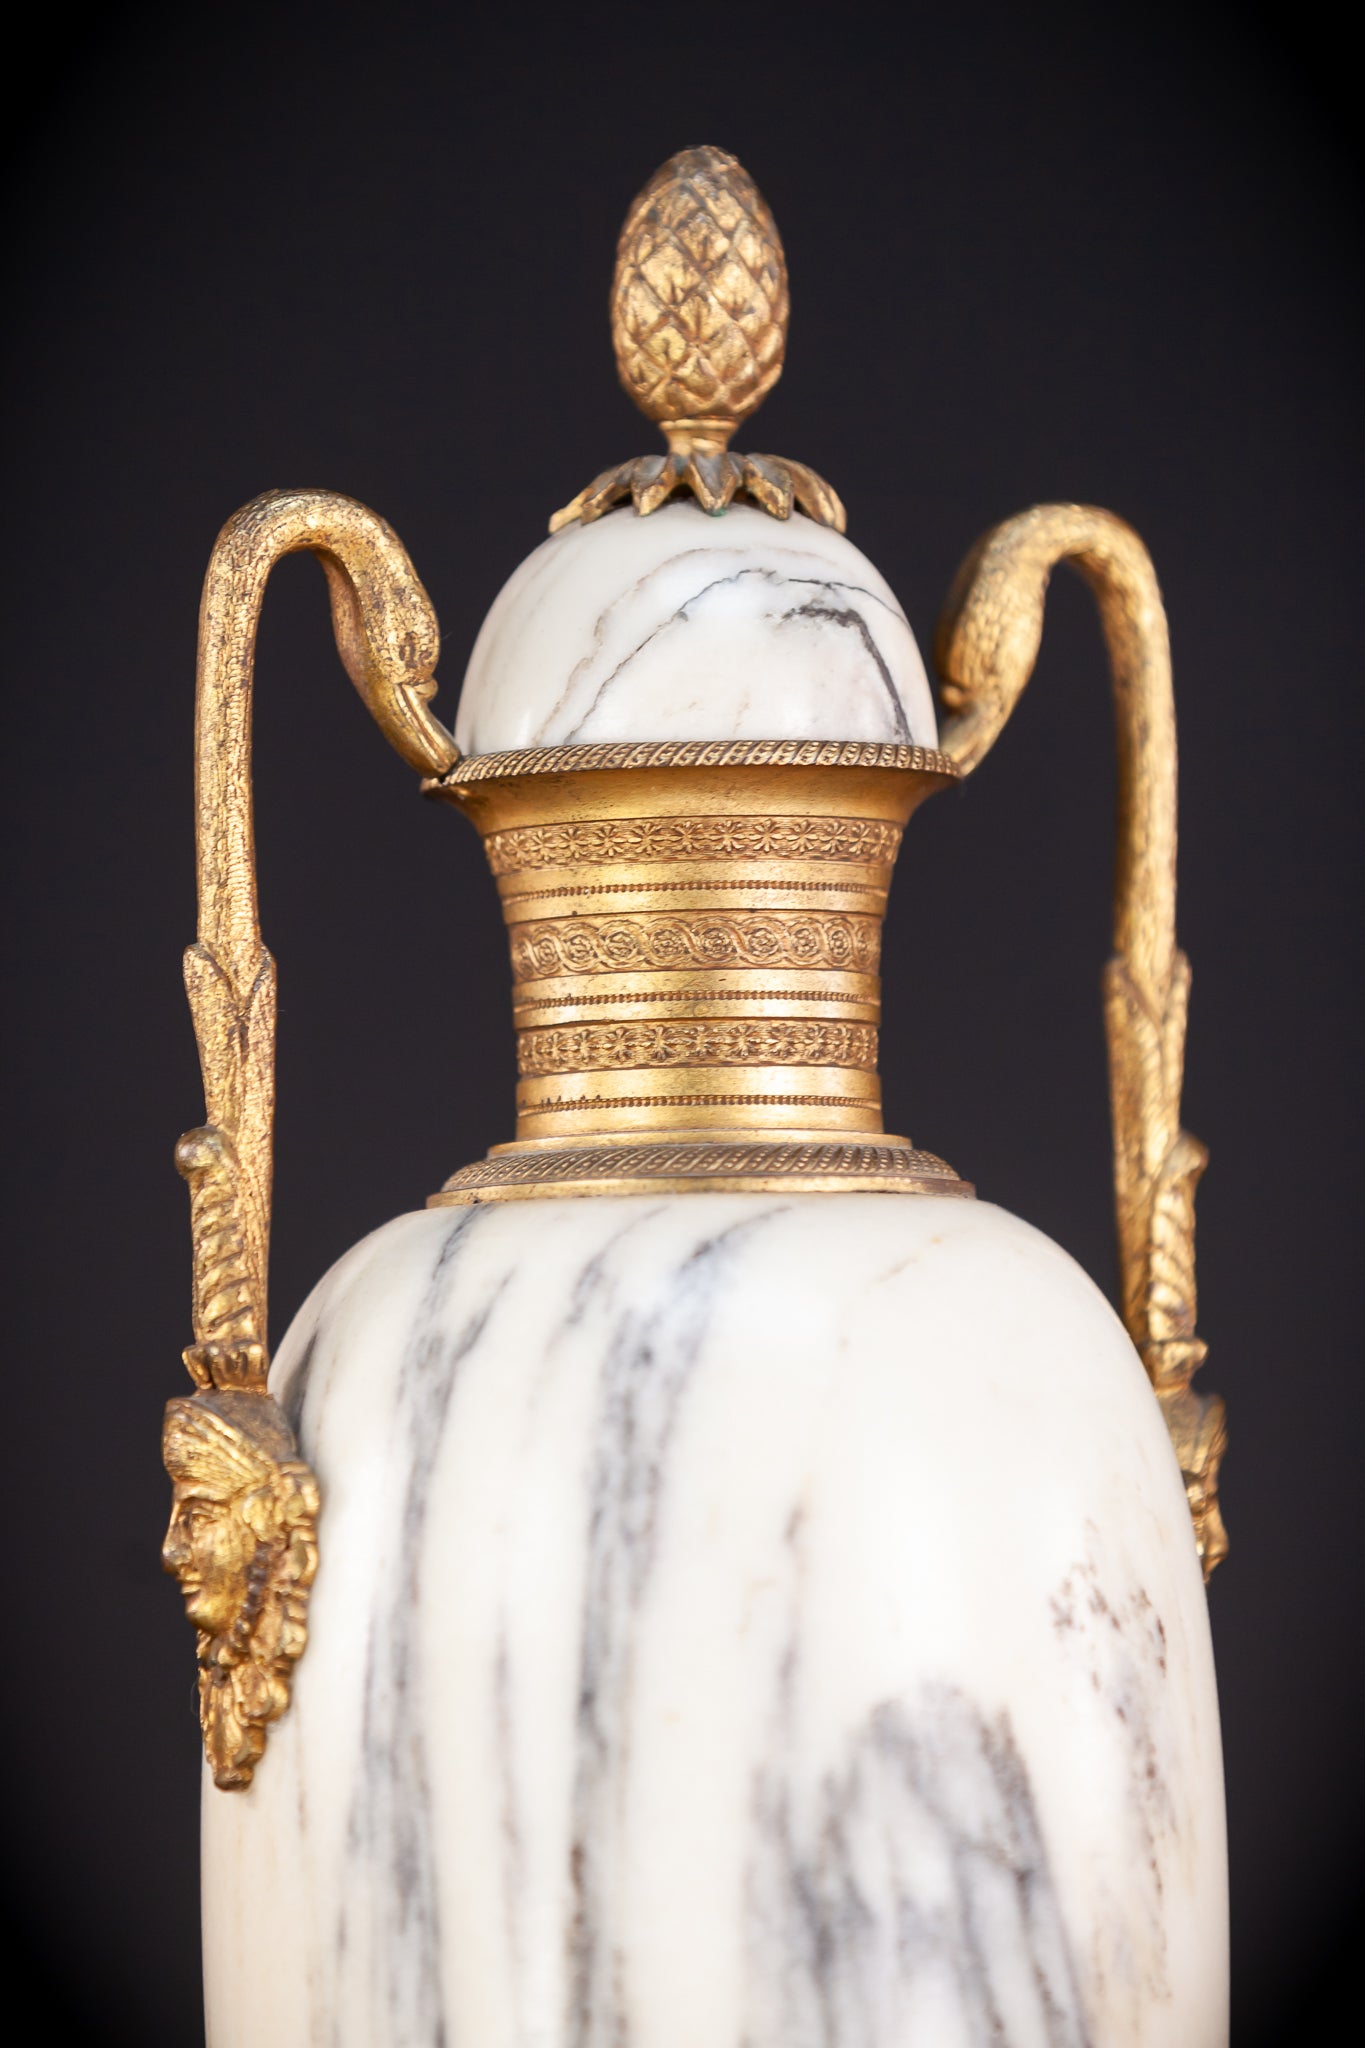 Pair of White Marble and Gilt Bronze Urns / Cassolettes | 1800s Antique | 14.2" / 46 cm